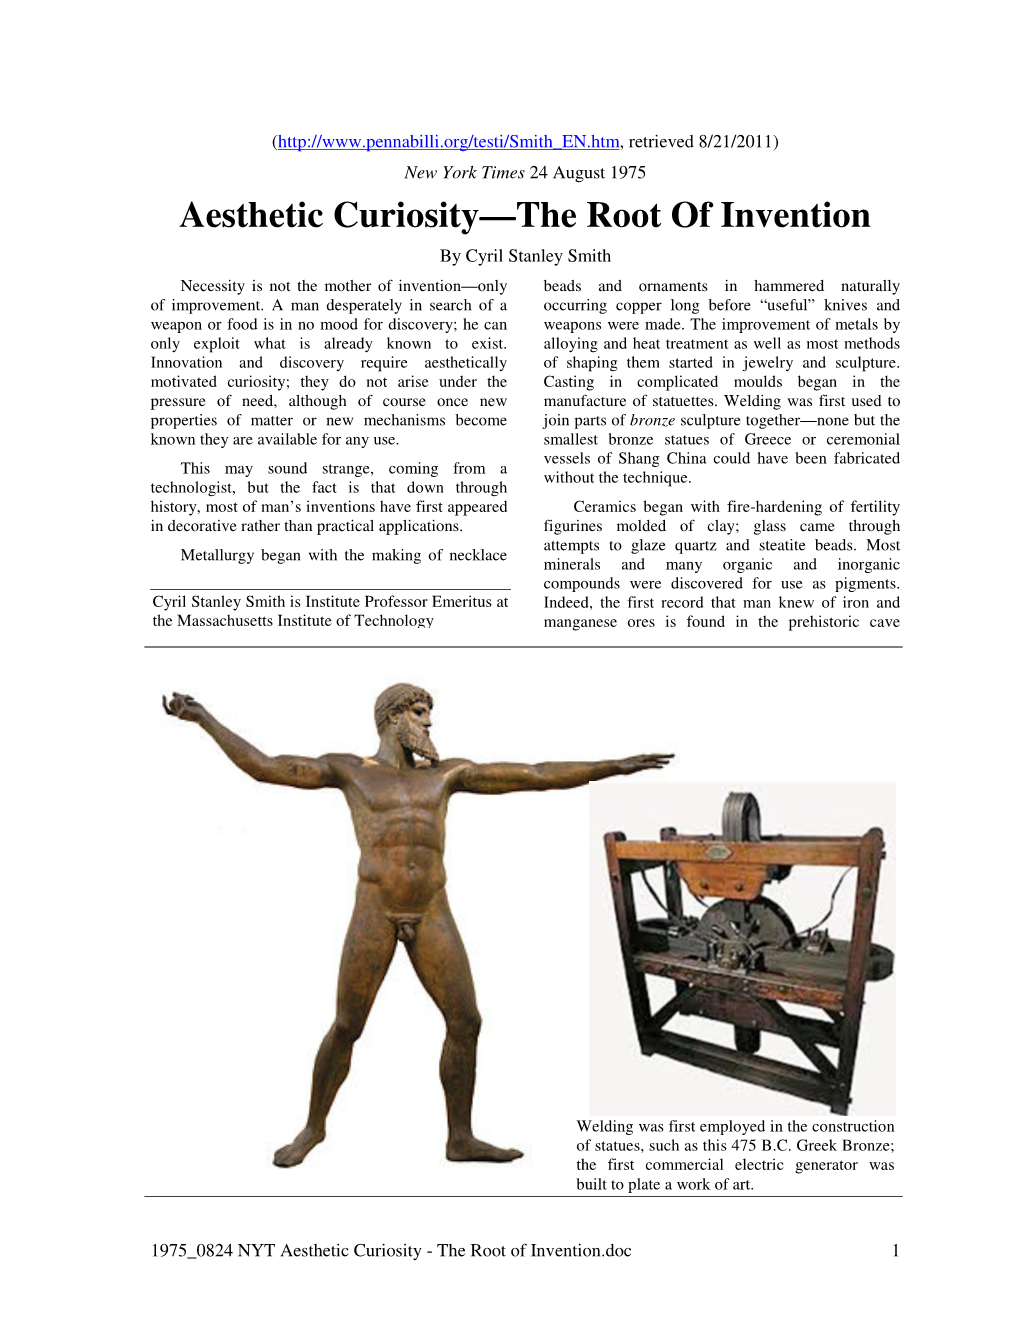 Aesthetic Curiosity—The Root of Invention